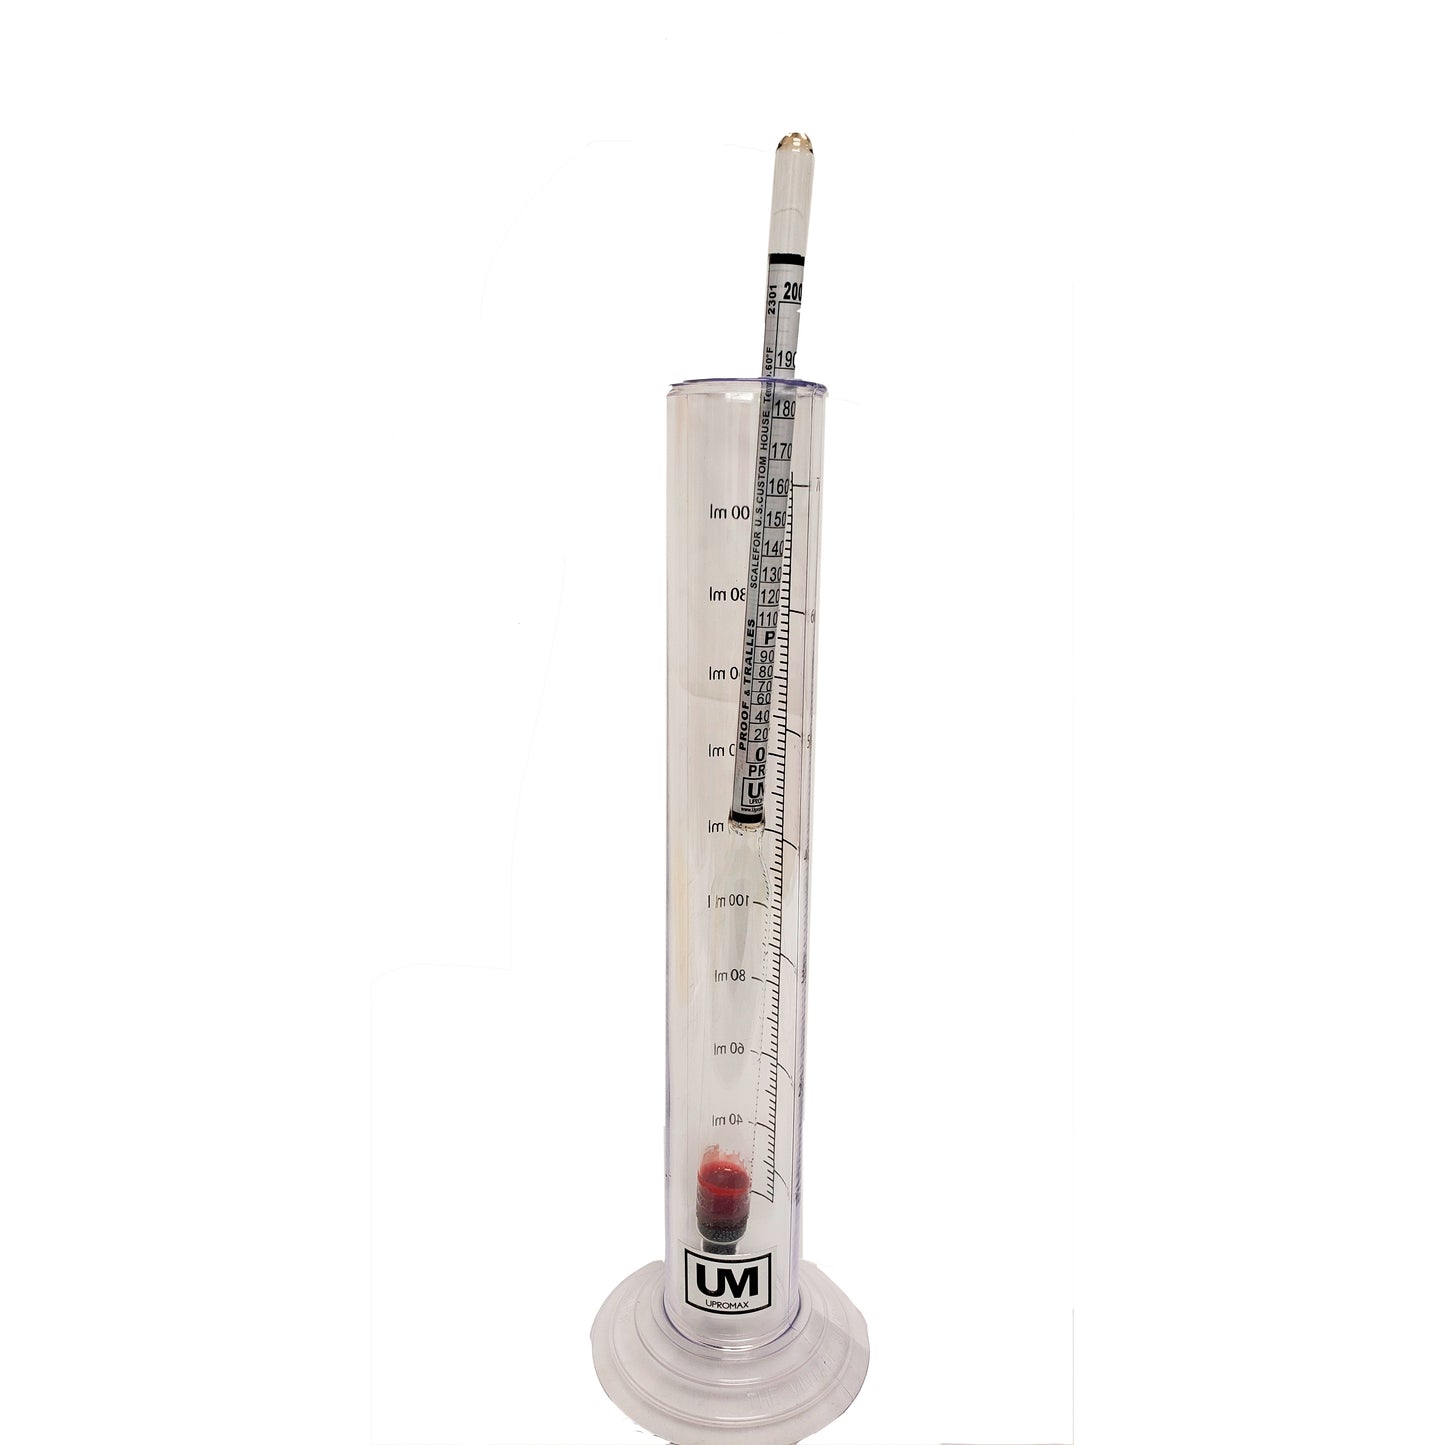 UPROMAX Deluxe Set Proof & Tralle Hydrometer ALCOHOL METER test SPIRIT SCALE 0-200% + JAR + Digital Thermometer - UproMax